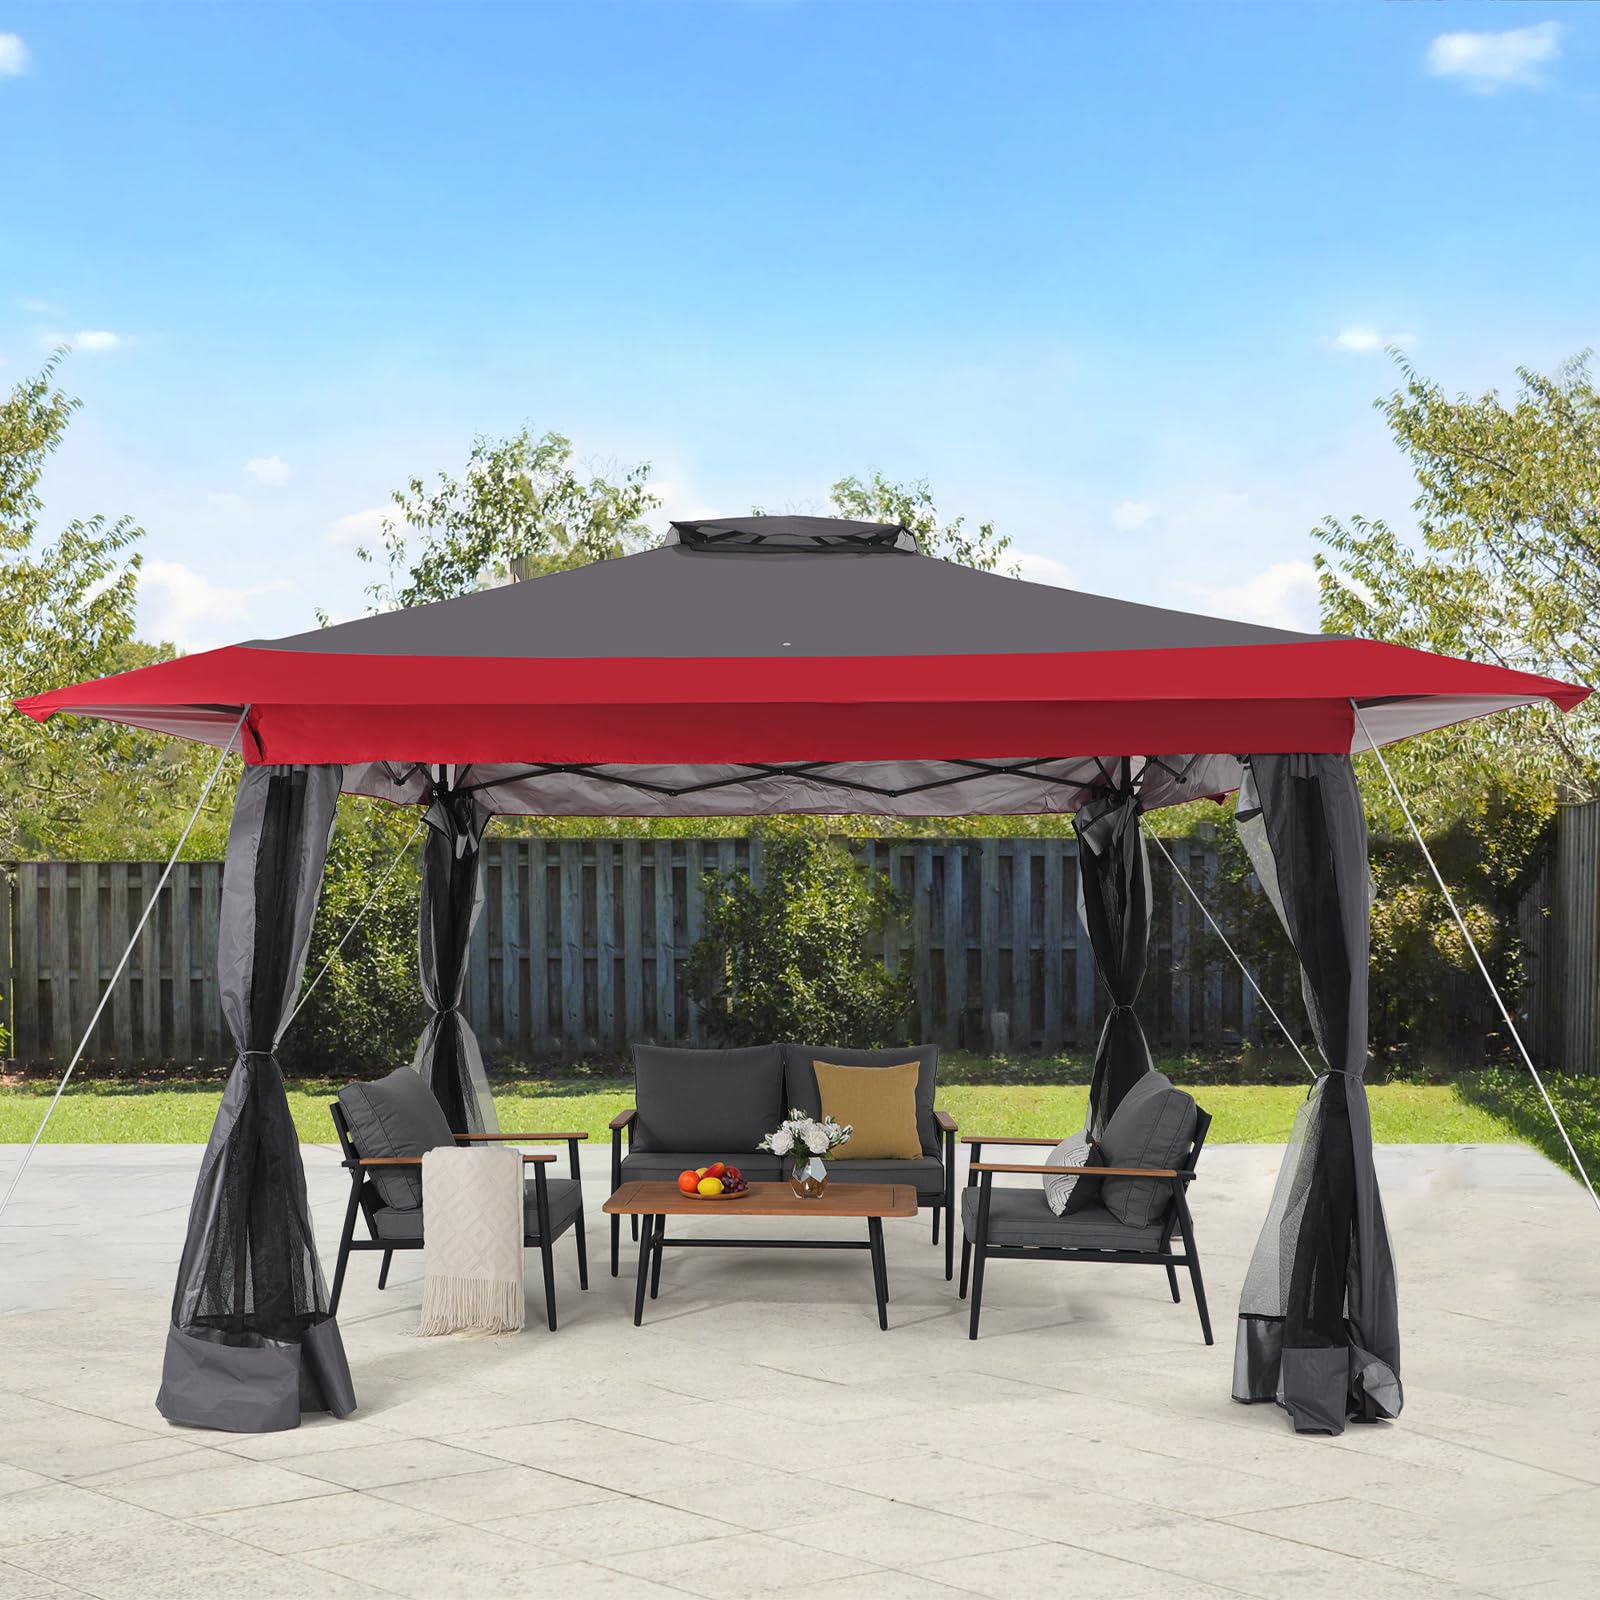 13'x13' Pop Up Gazebo With Mosquito Netting Outdoor Canopy Tent Shade